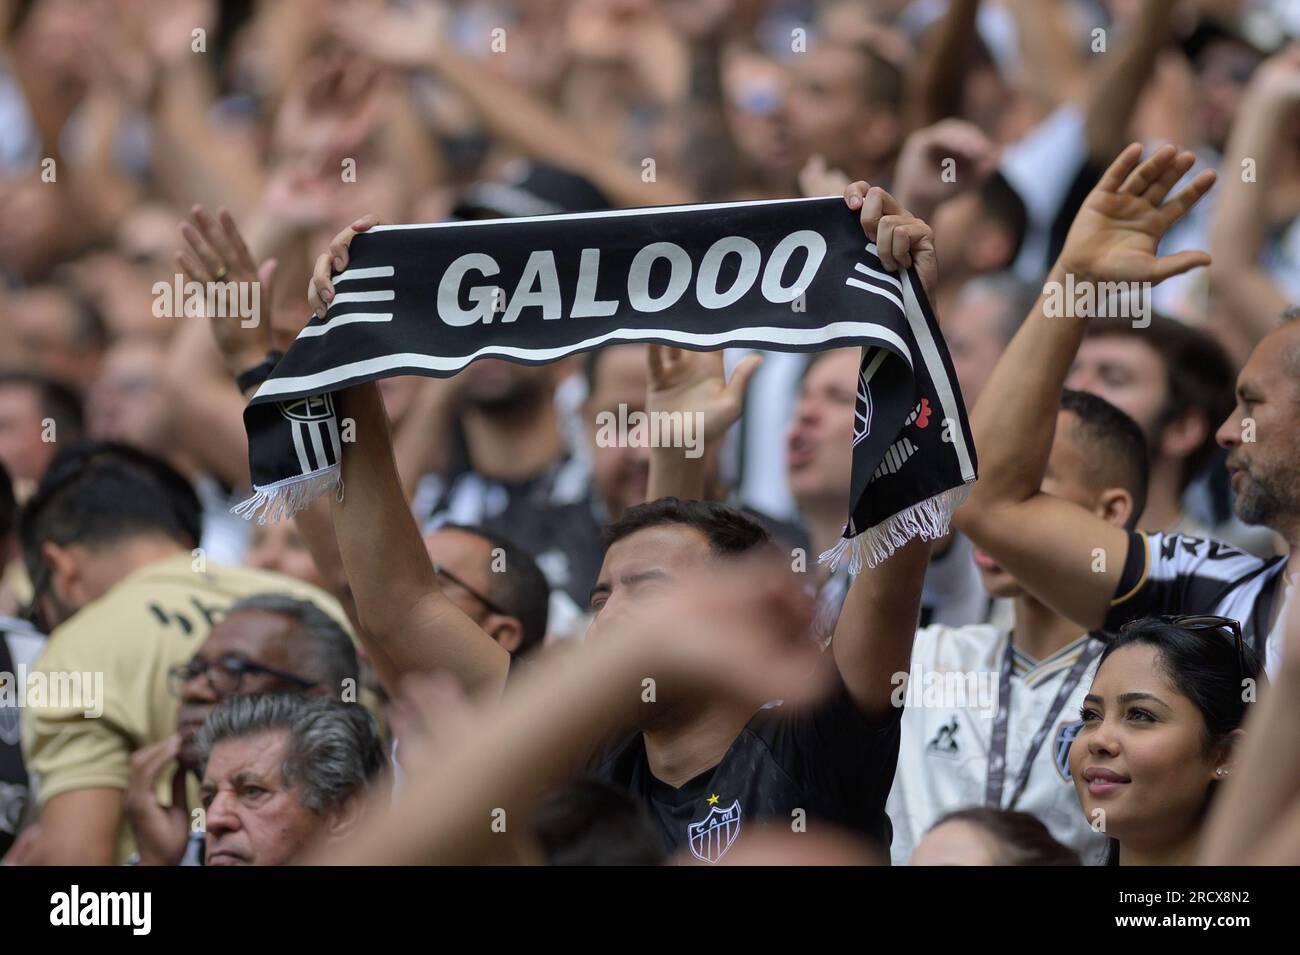 MG - BELO HORIZONTE - 07/16/2023 - FRIENDLY FRIENDLY, LENDAS DO GALO - Fans during the match between LENDAS DO GALO and [TEAM 2] at Arena MRV stadium for the Friendly championship. Photo: Alessandra Torres/AGIF/Sipa USA Stock Photo